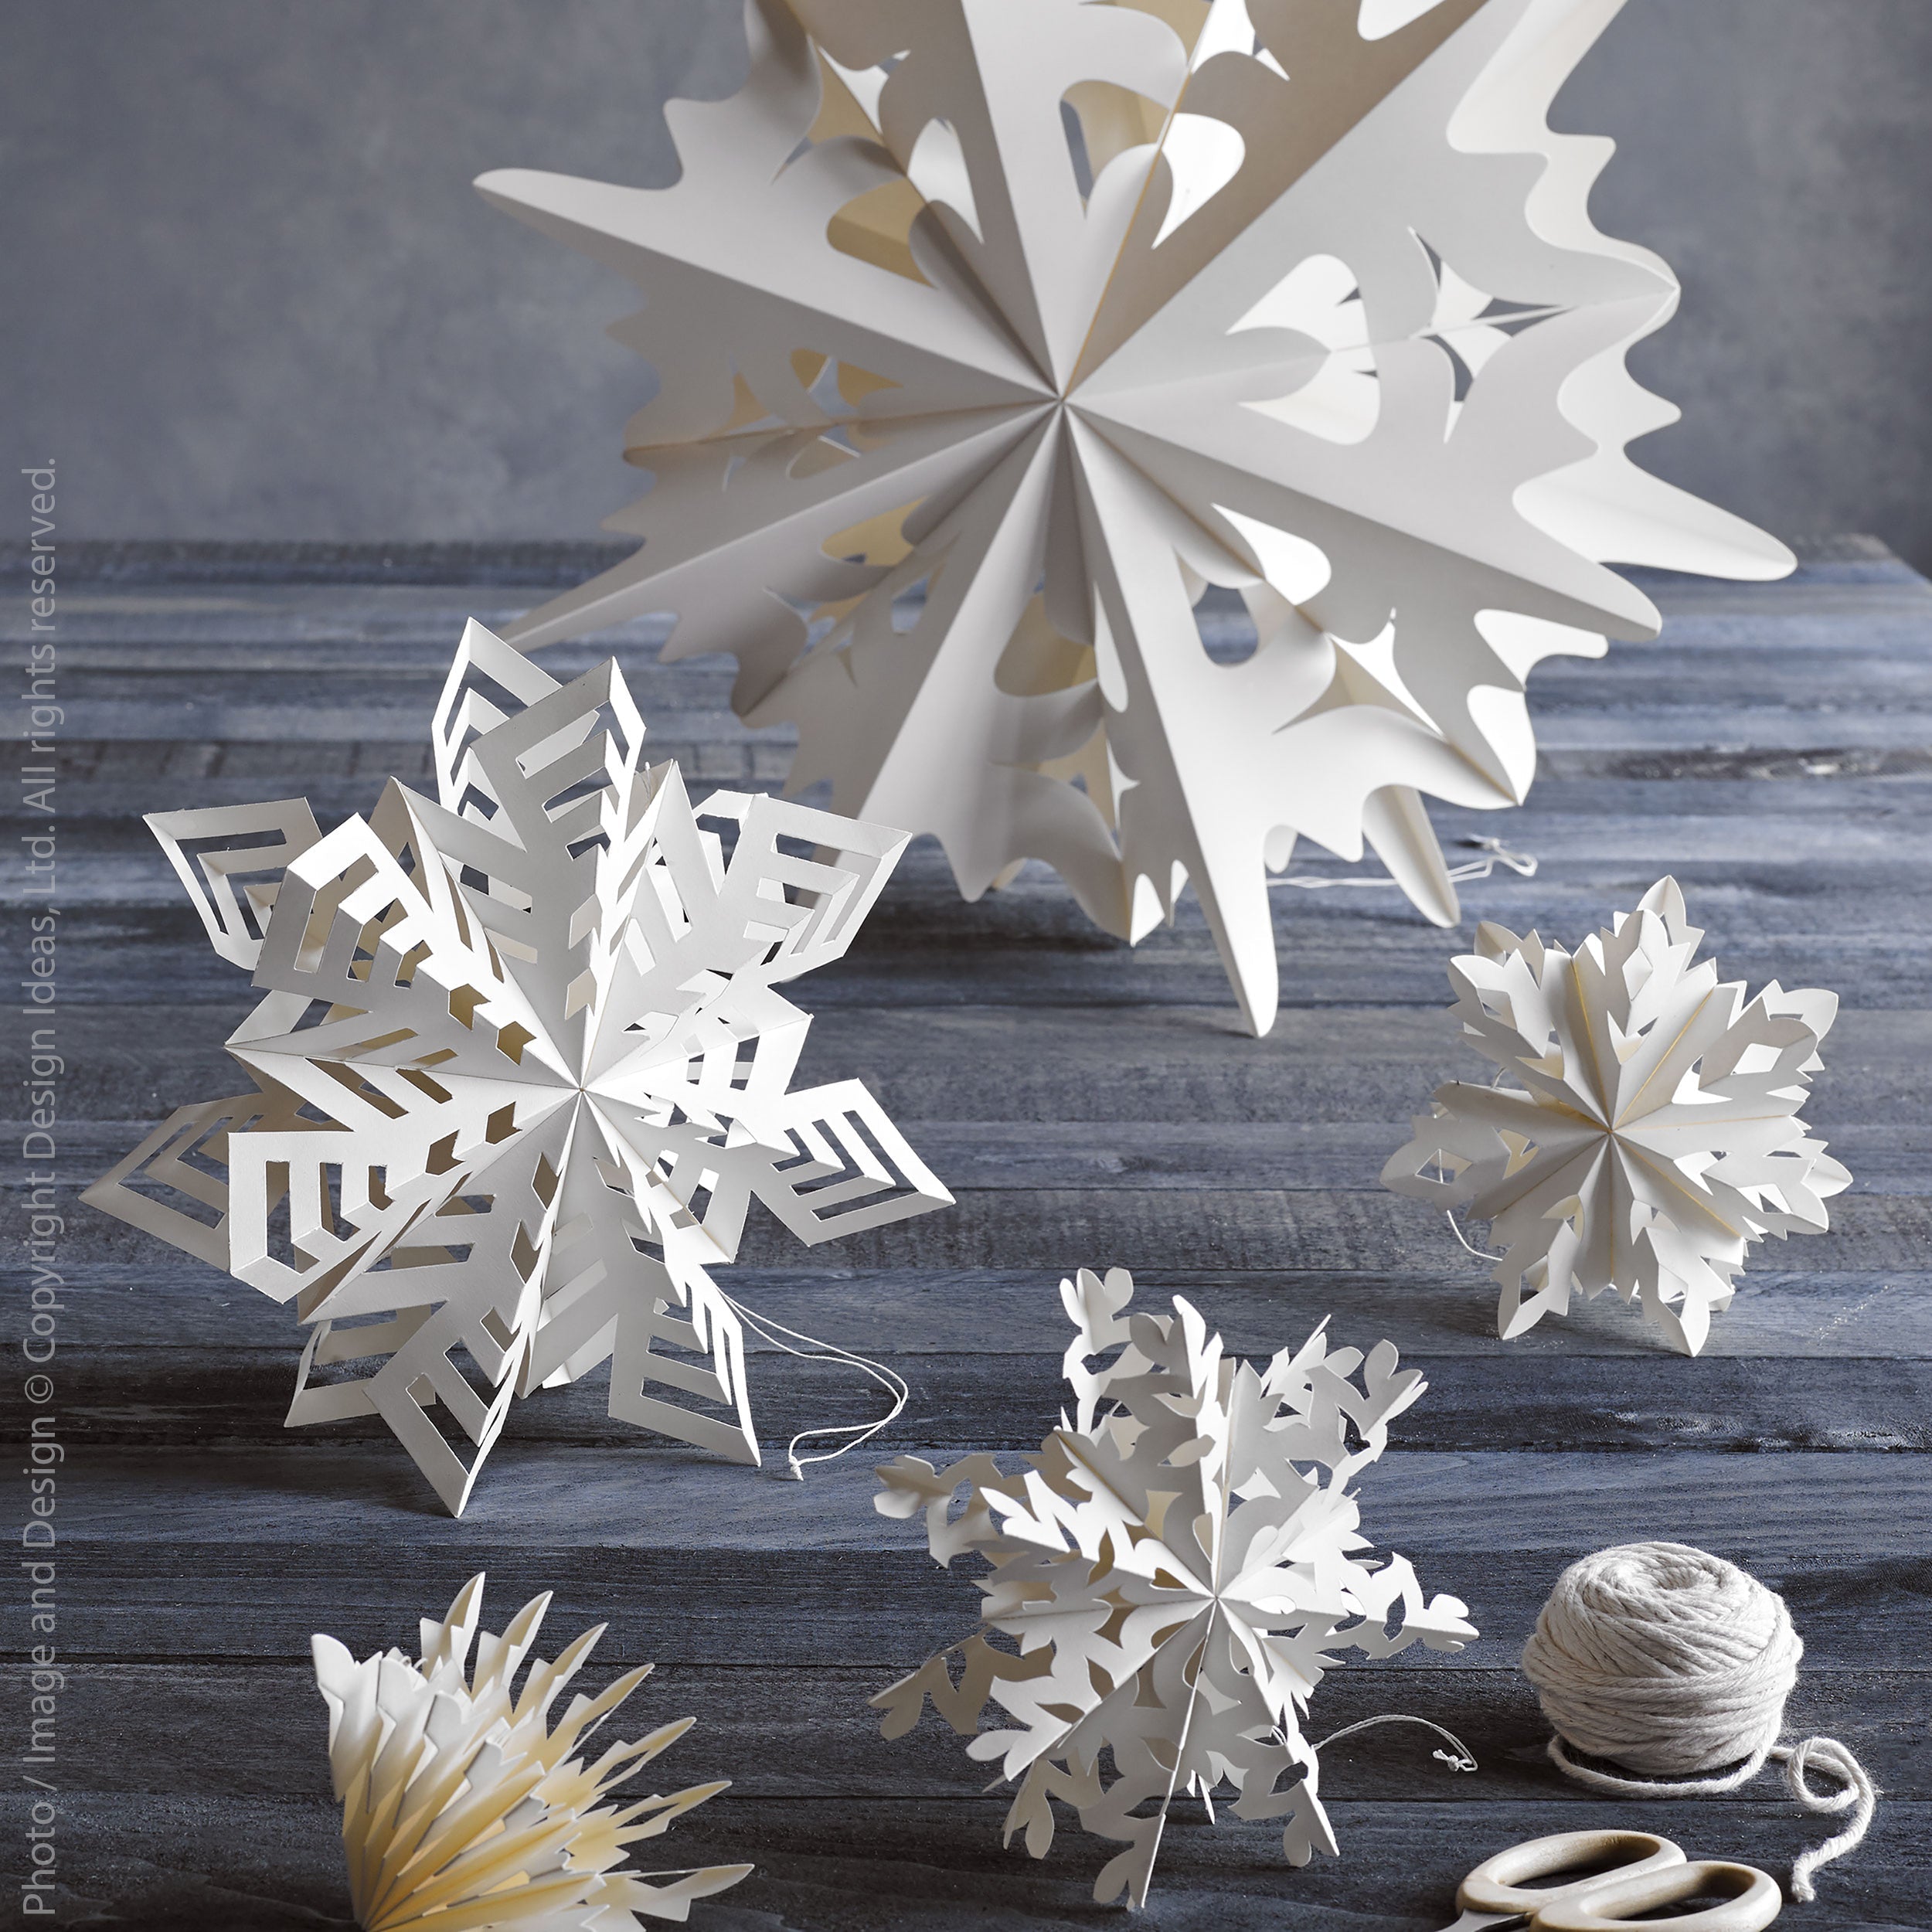 Flurry Paper Snowflake Arctic (Medium) Natural Color | Image 2 | From the Flurry Collection | Skillfully made with natural paper for long lasting use | Available in white color | texxture home